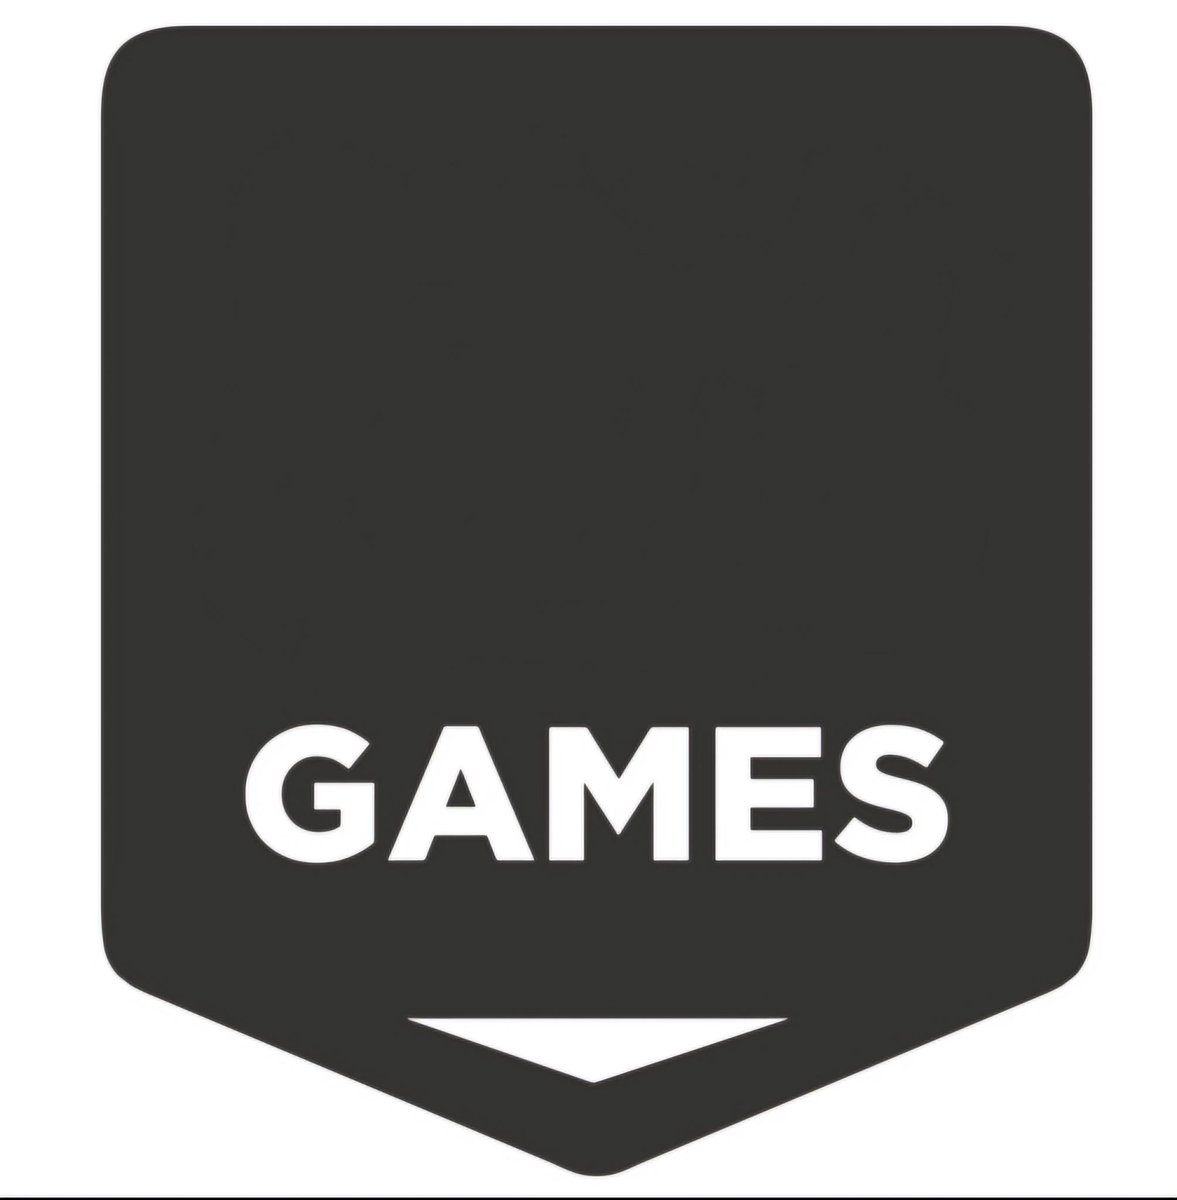 they should remove the rarity from the games logo